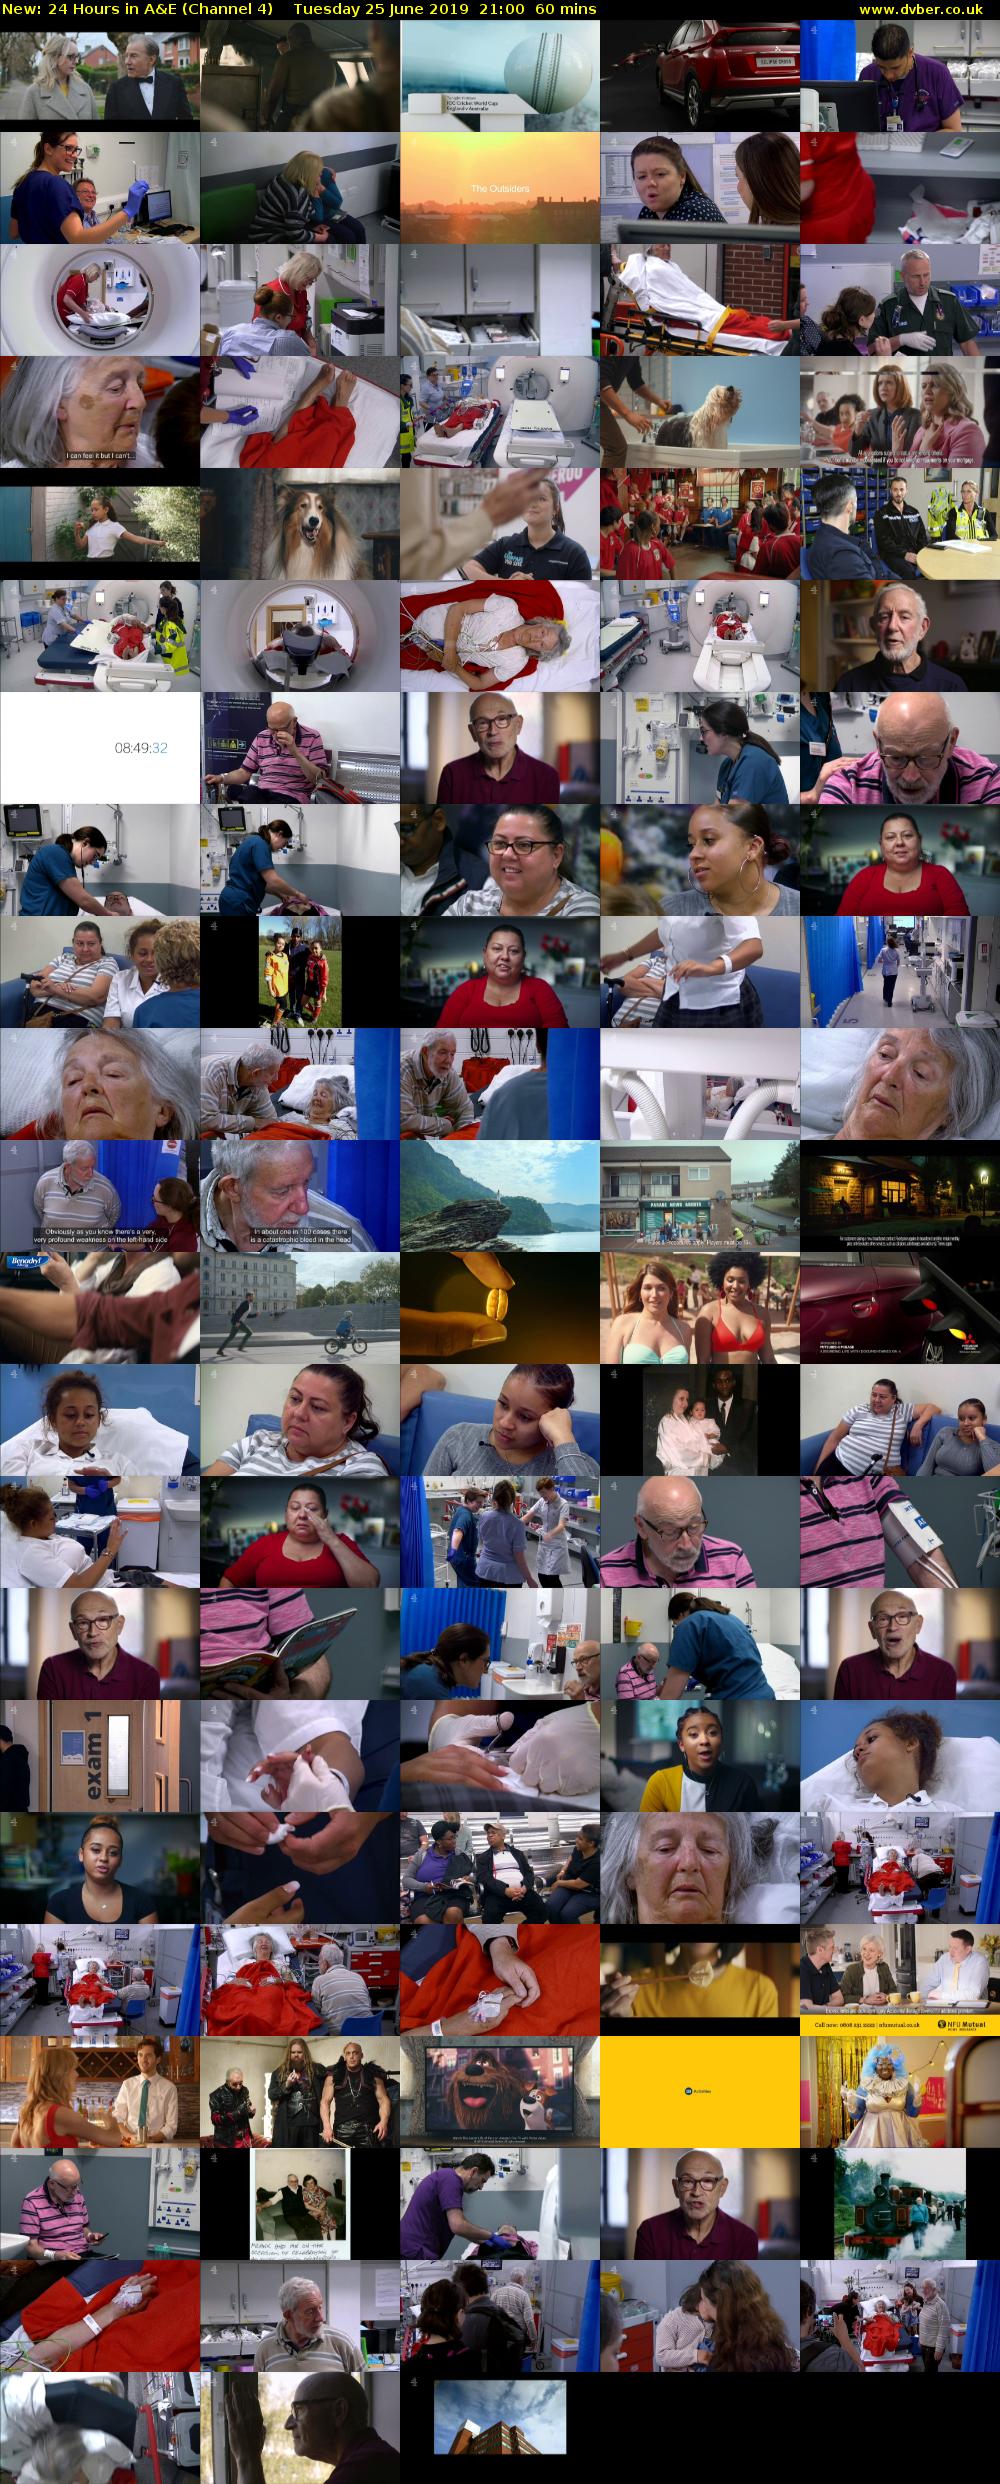 24 Hours in A&E (Channel 4) Tuesday 25 June 2019 21:00 - 22:00